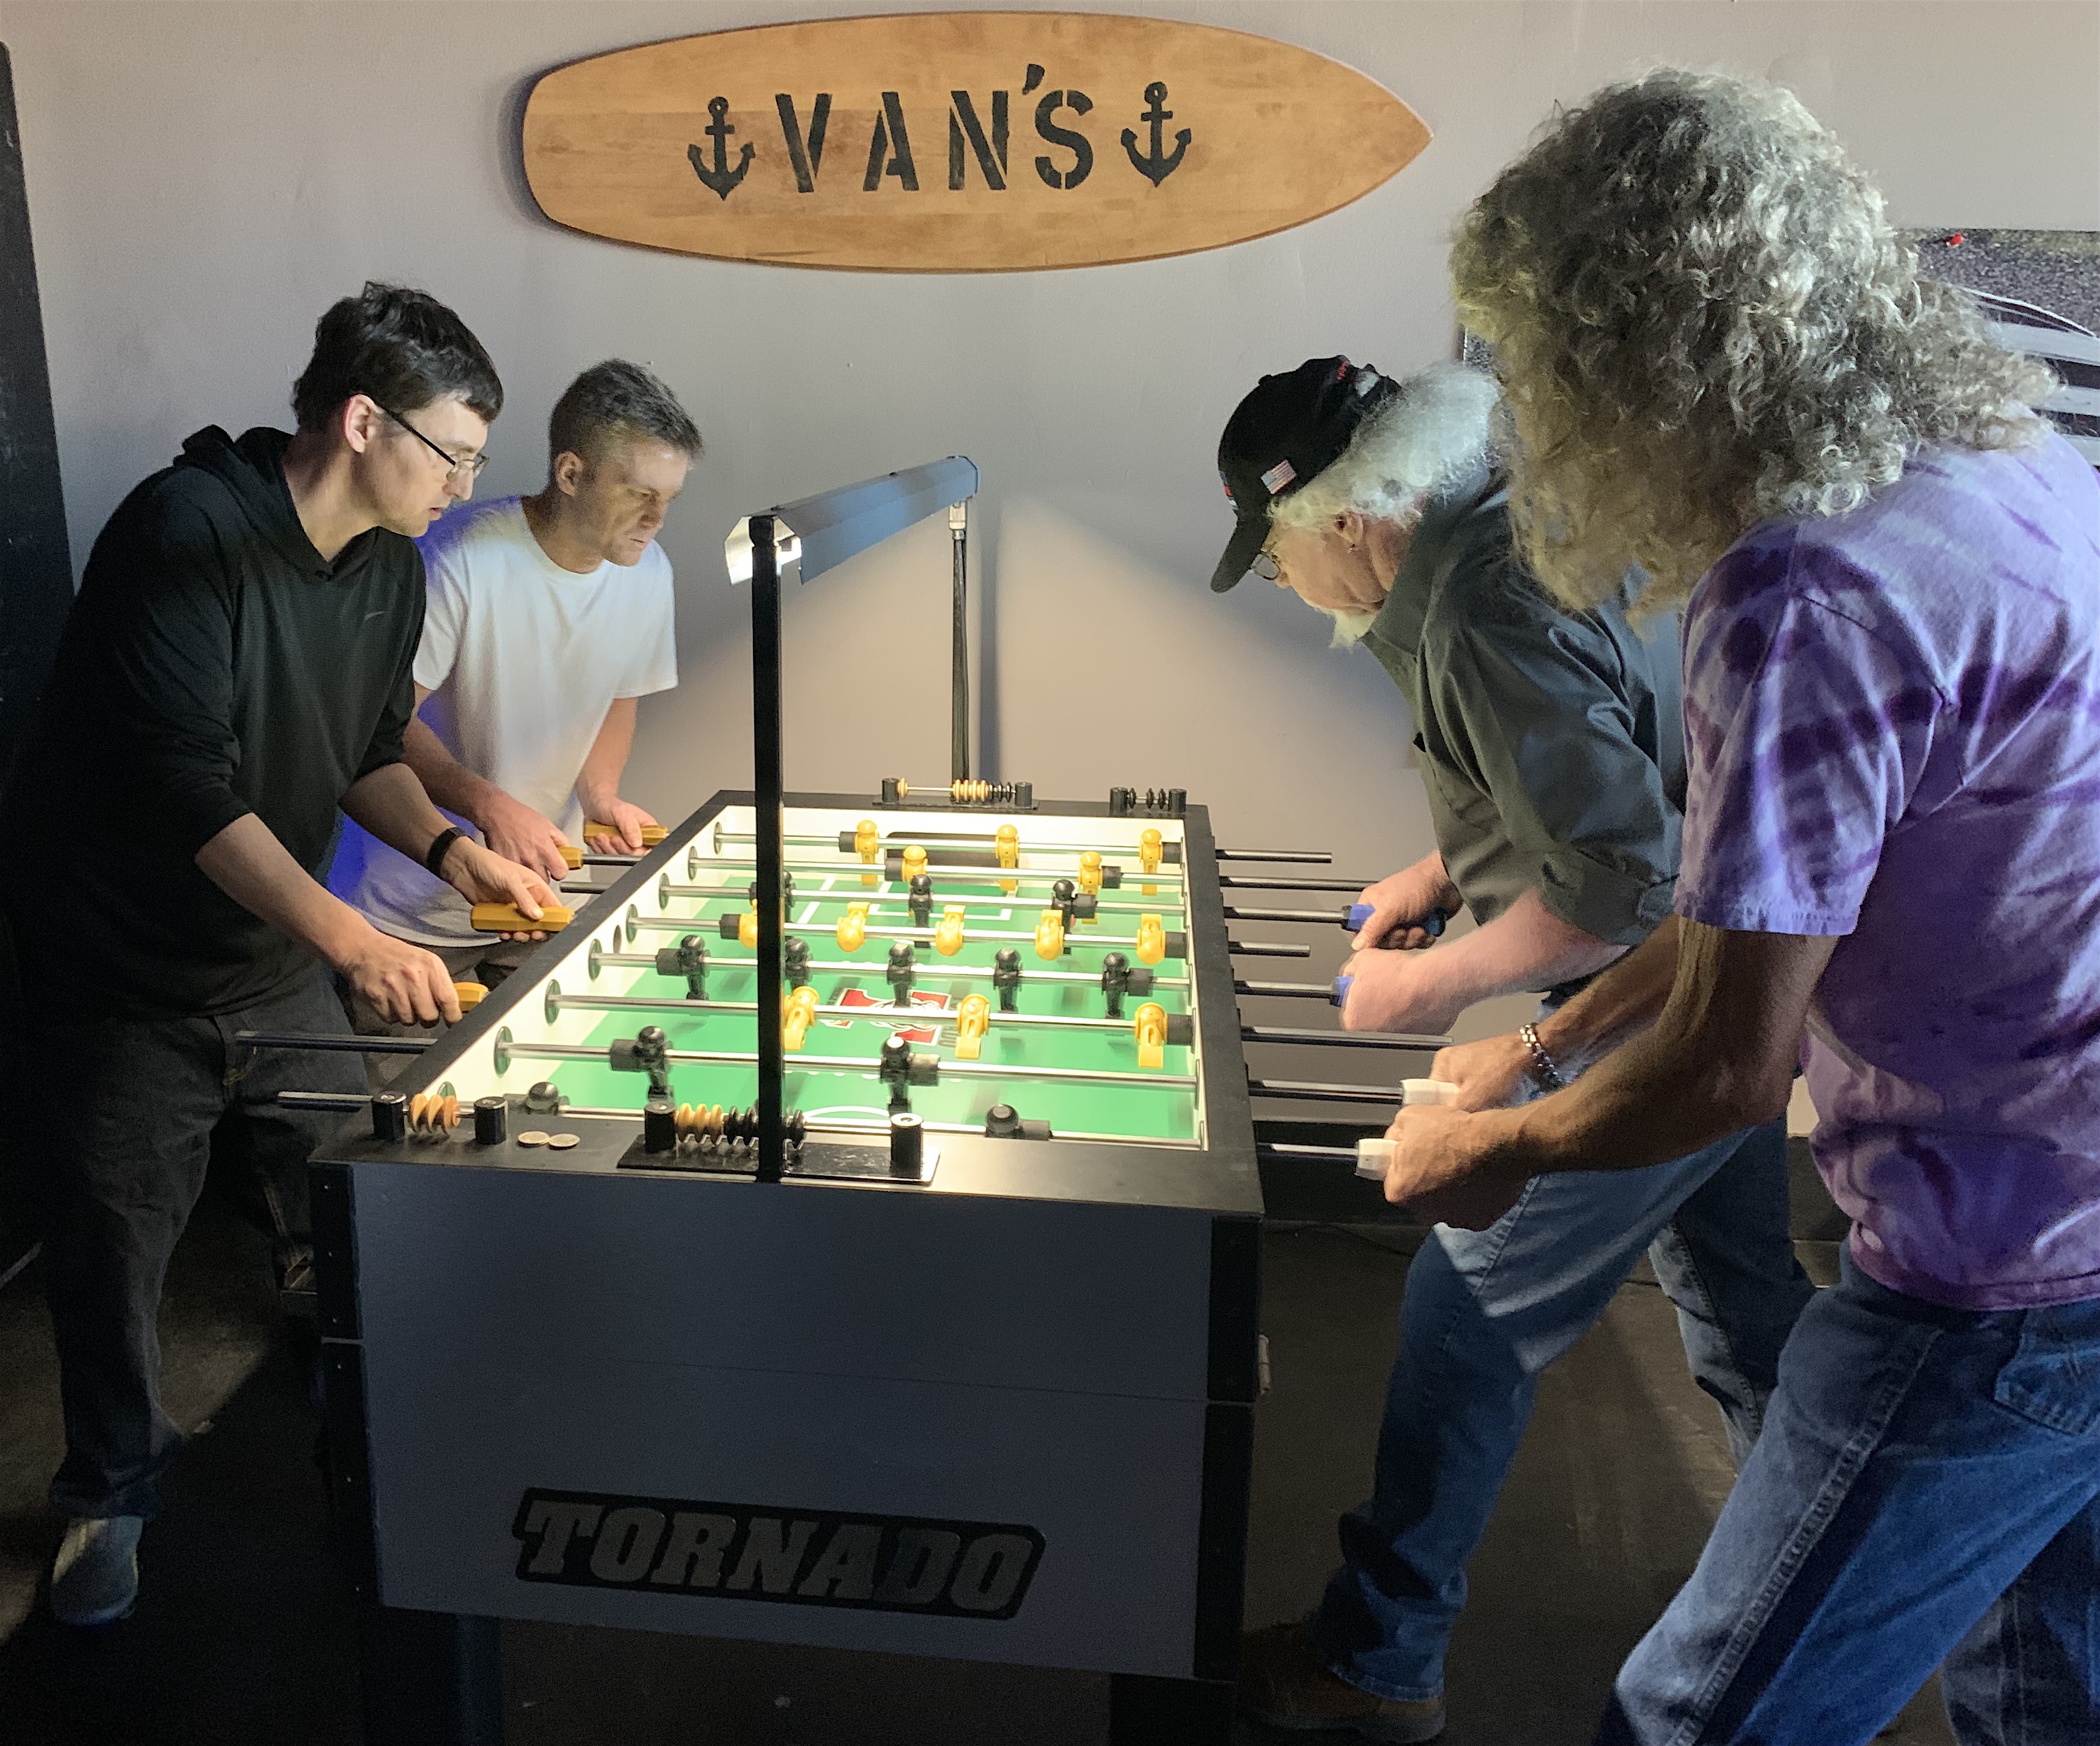 Shown is Ala-Amateur Foosball tournament action at VanÕs Bar in Leeds, players competing for the title are David Marler & Josh Monroe vs. Paul Gulledge & Andy Gulledge.